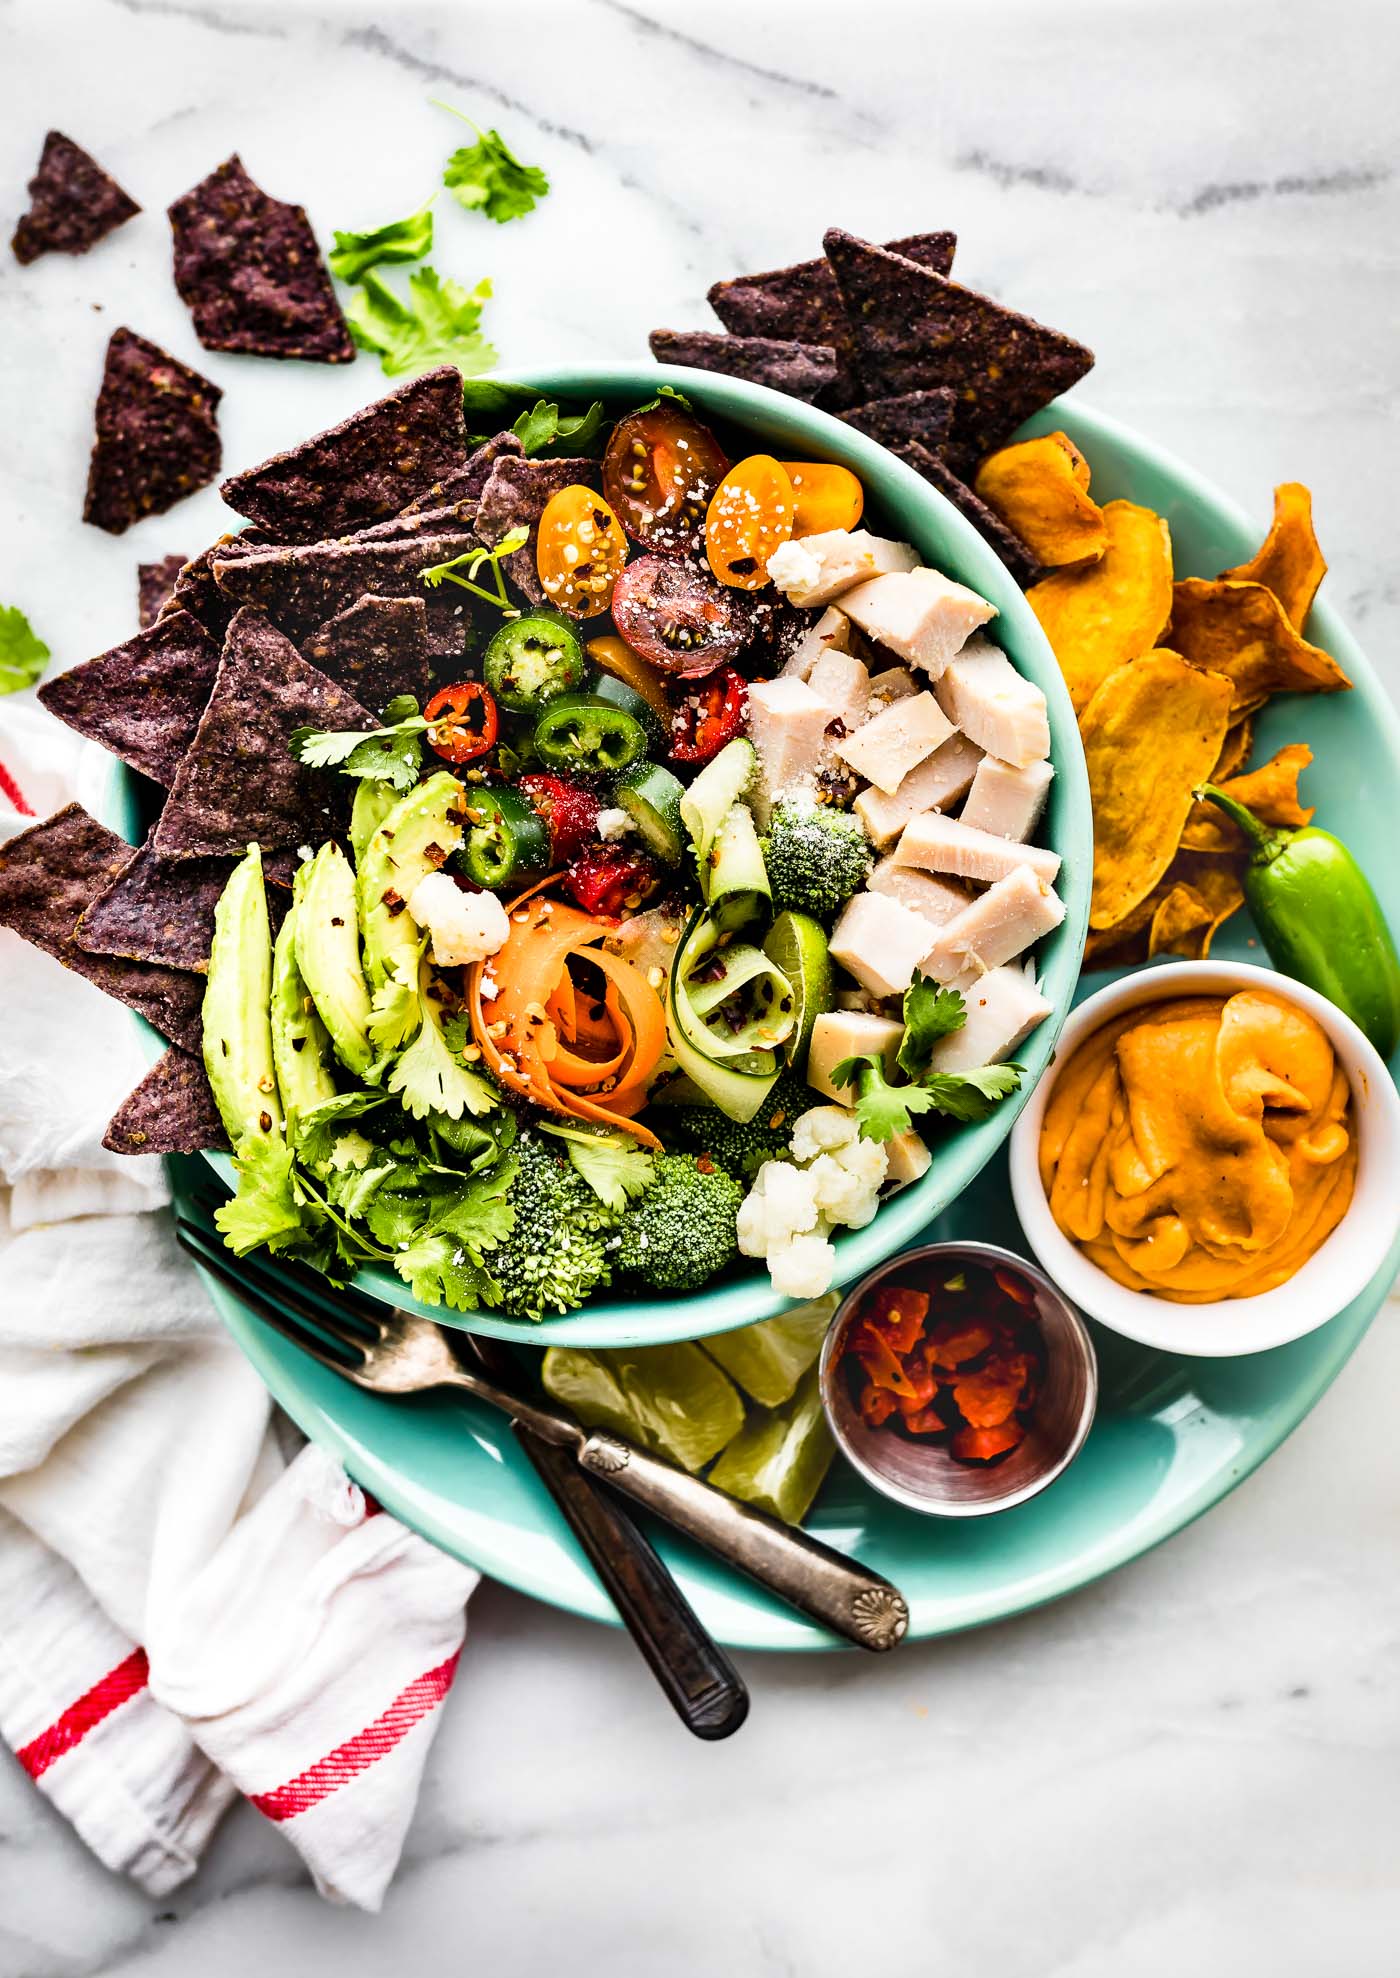 Healthy Leftover Turkey Nachos Salad Bowls! Utilize leftover turkey and vegetables with these quick and wholesome loaded salad bowls! Dairy free friendly.